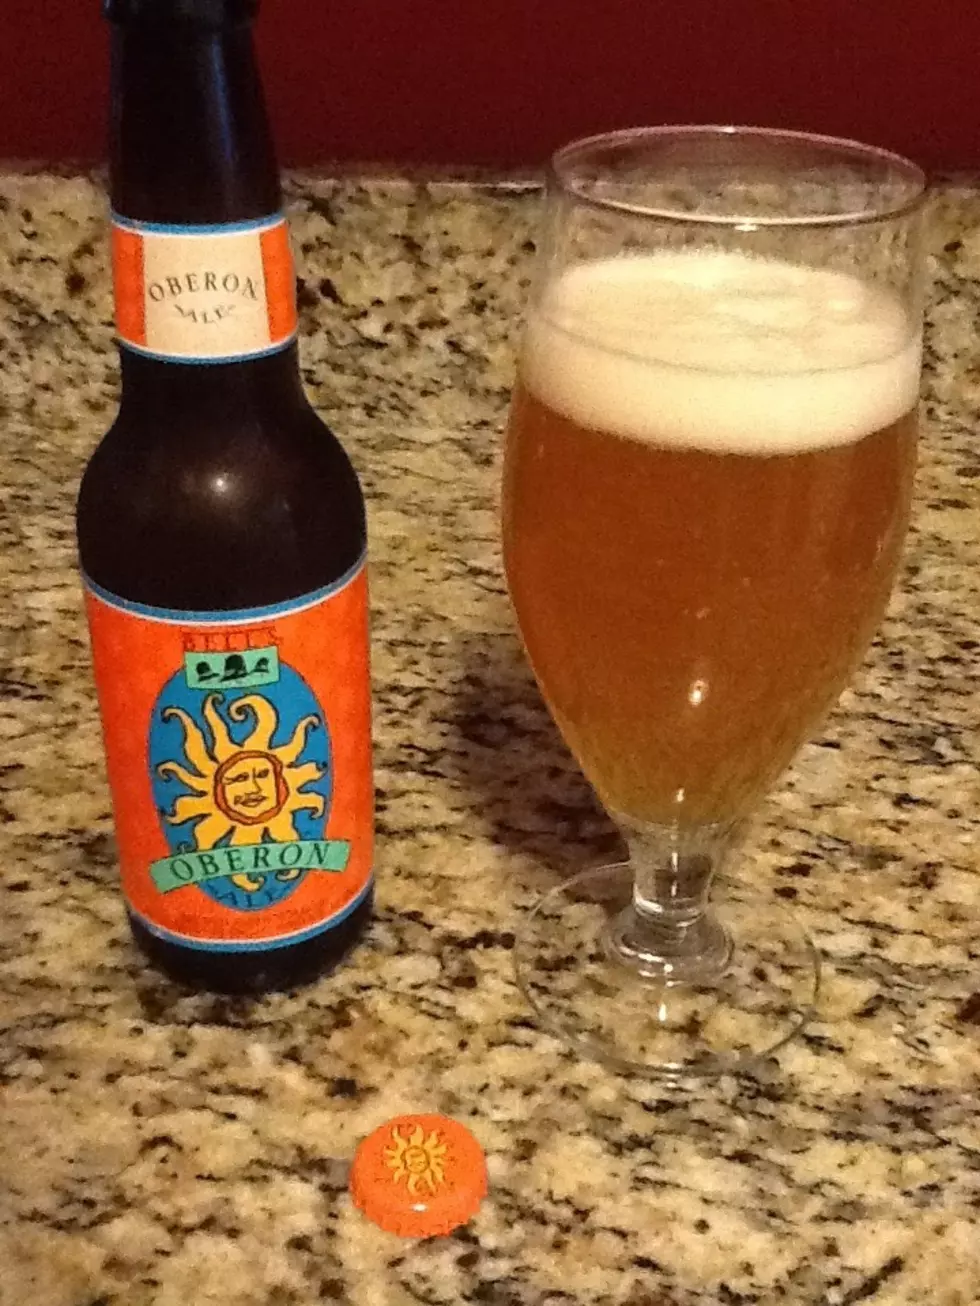 Oberon Day! Find Out Where To Celebrate & Drink